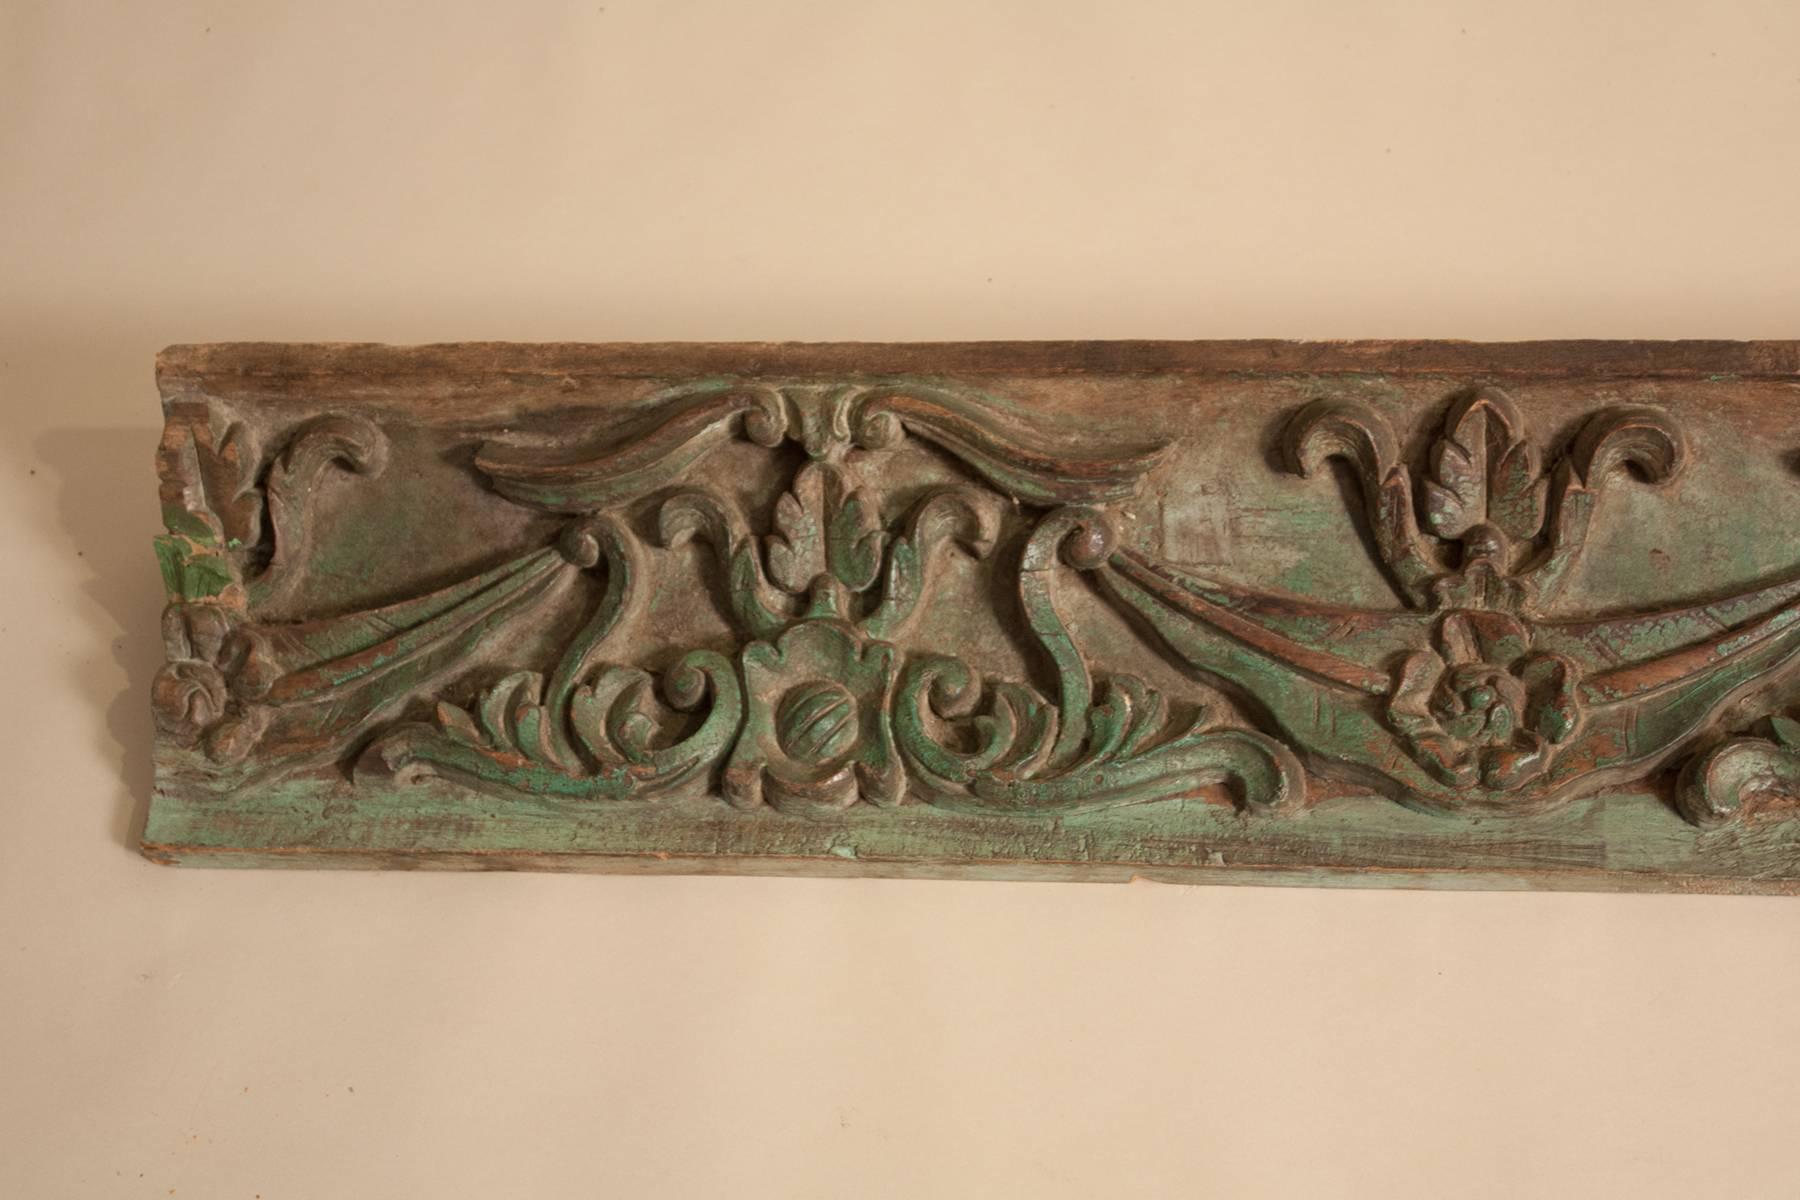 Anglo Raj 19th Century Carved Teak Wood Architectural Panel